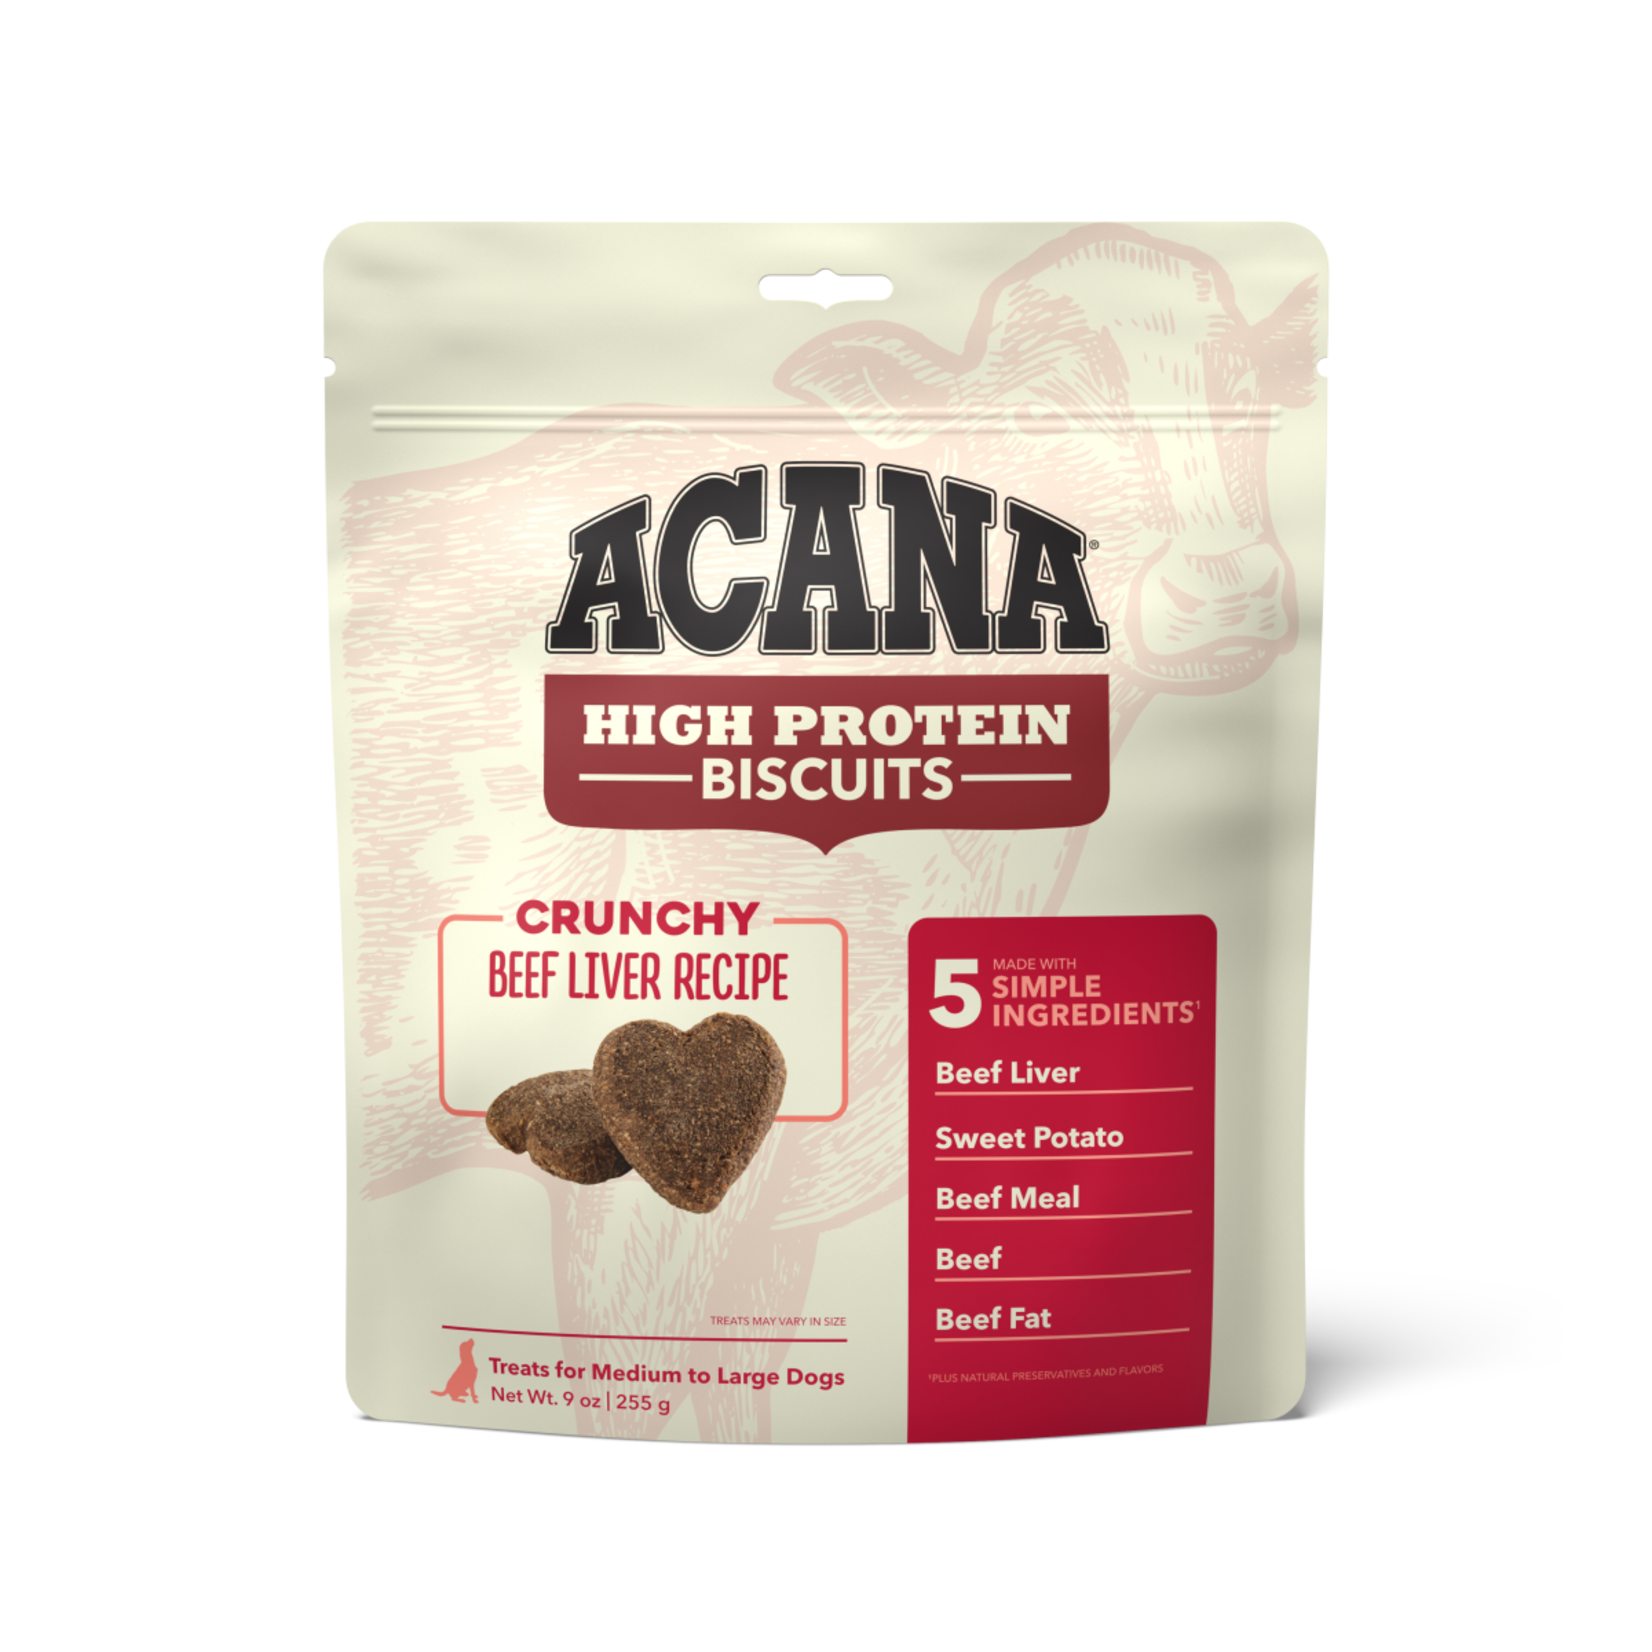 Champion Pet Foods Acana Dog High Protein Biscuits Beef Liver Recipe 9 OZ